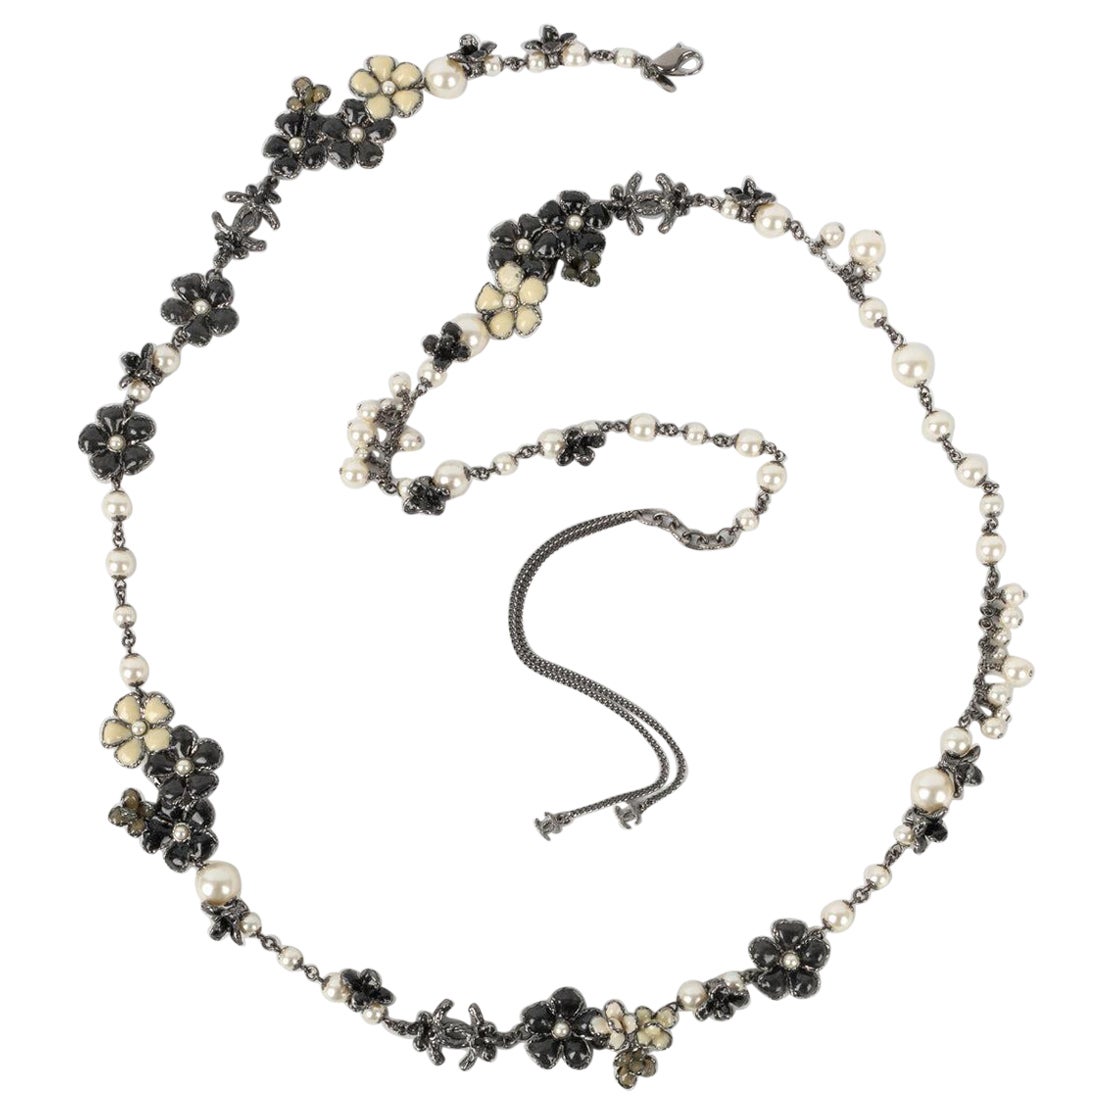 Chanel Silvery Metal Flower Necklace with Costume Pearls and Resin, 2012 For Sale